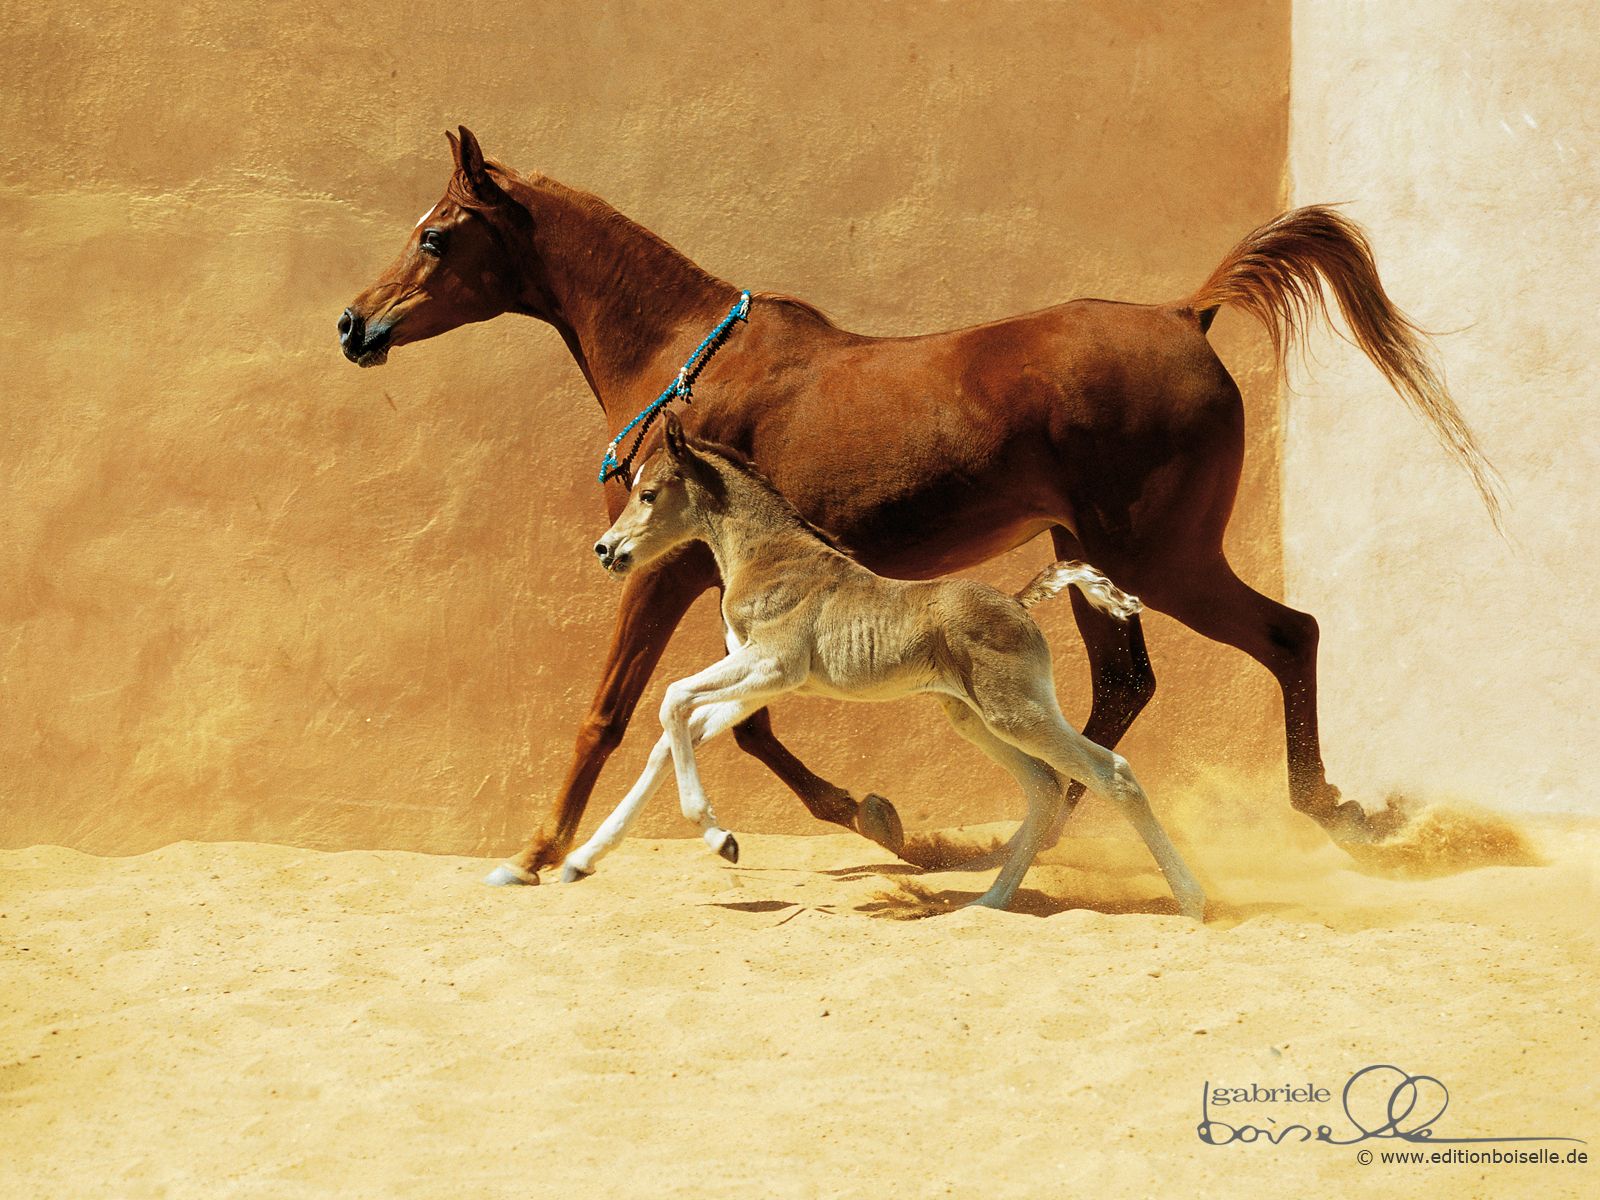 Arabian Wallpaper. Arabian Horse Wallpaper, Arabian Camels Wallpaper and Arabian Nights Background